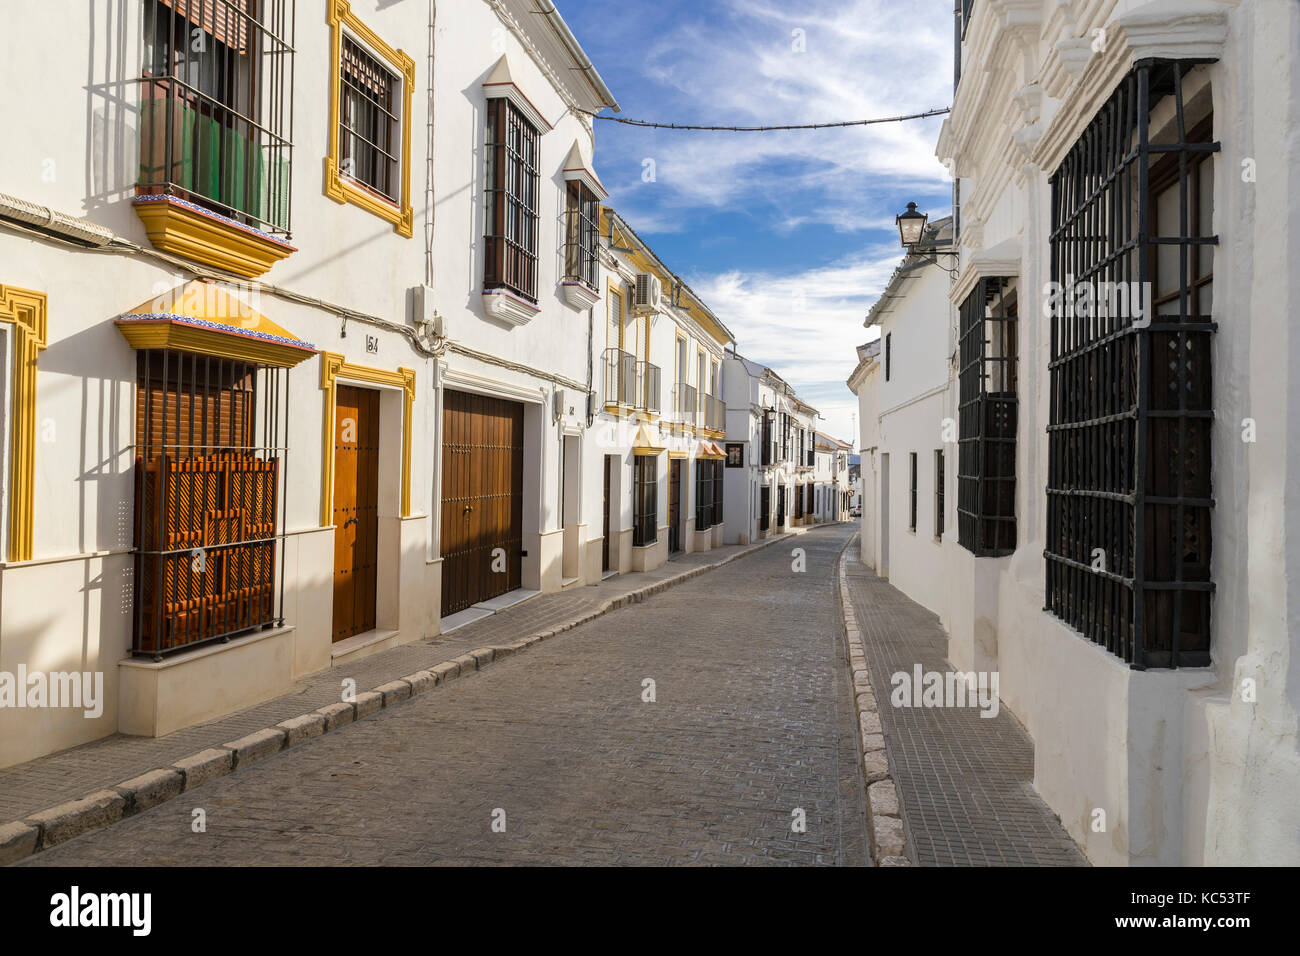 Lane, typical window grilles, Osuna, province of Seville, Andalusia, Spain Stock Photo